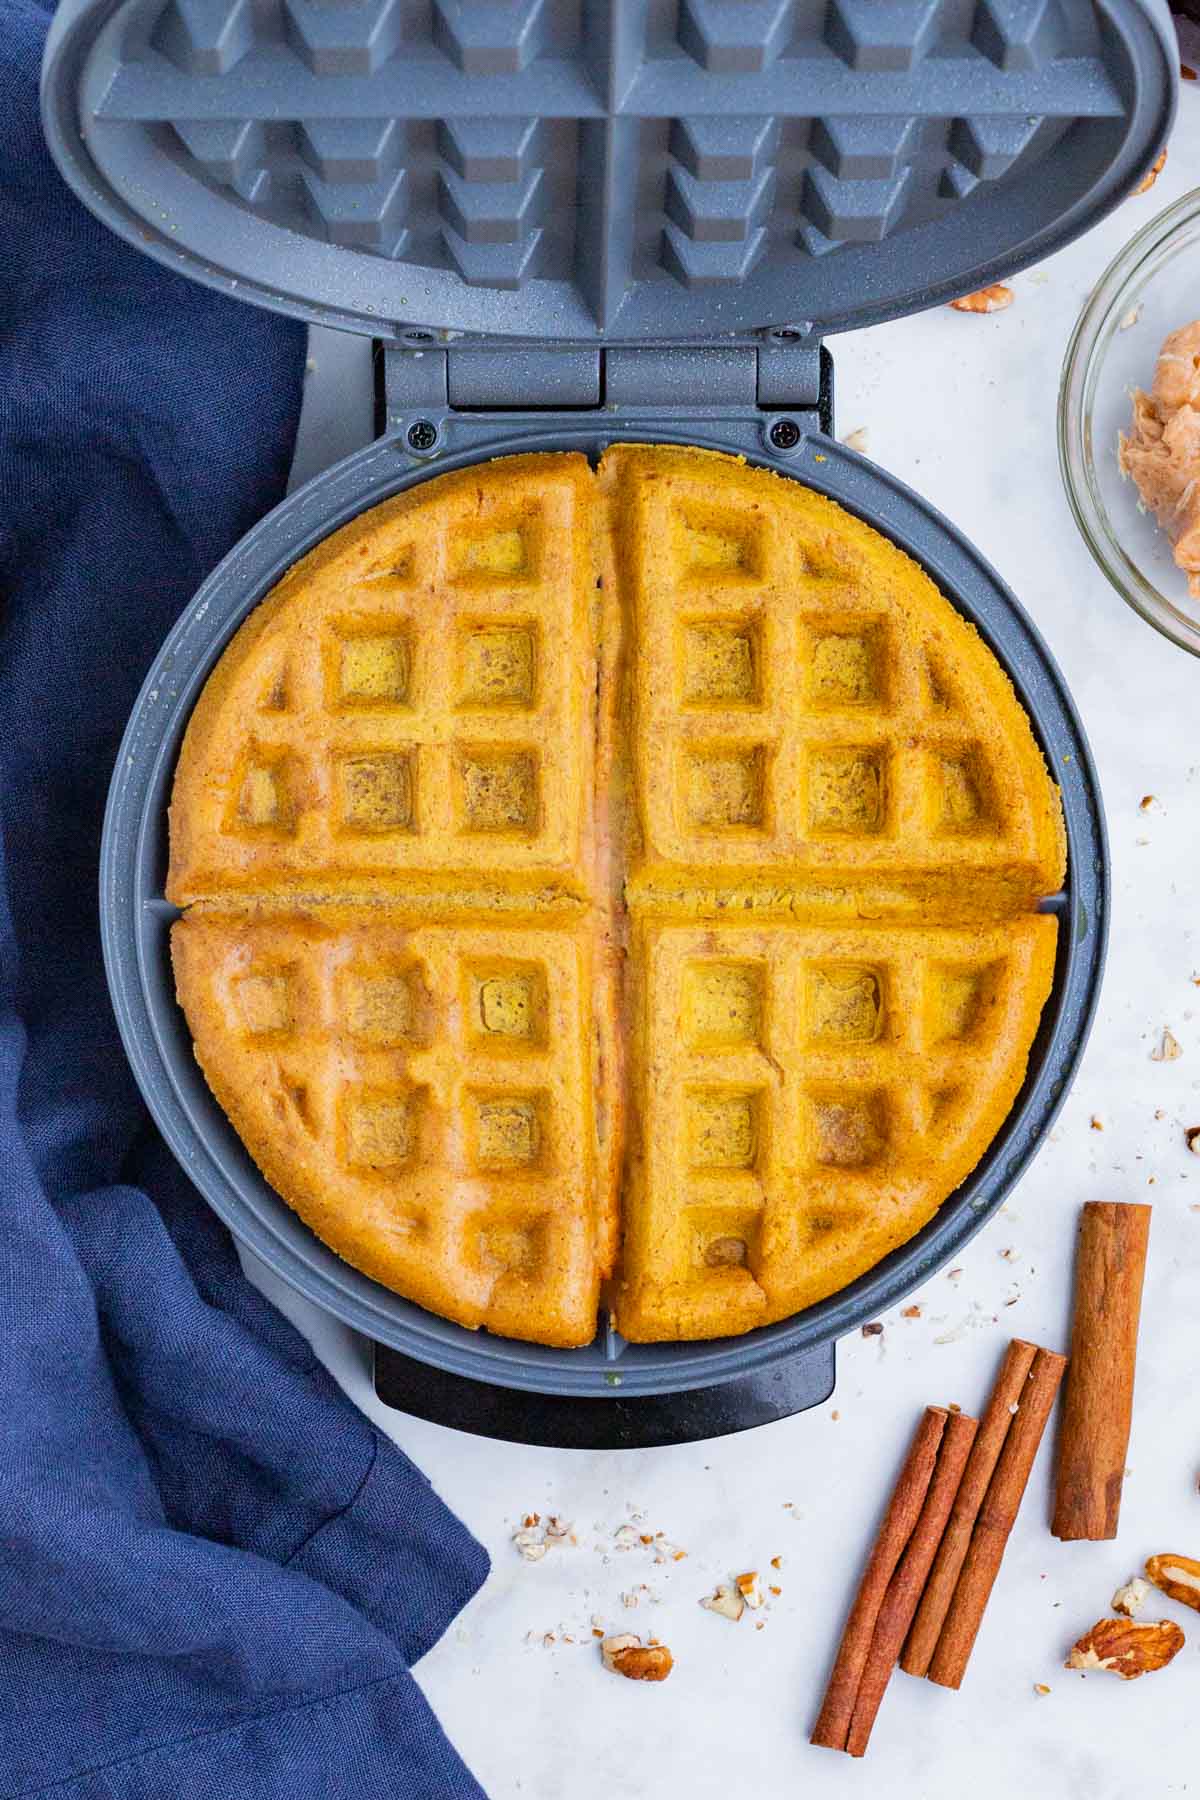 Pumpkin waffles are cooked on a waffle iron.